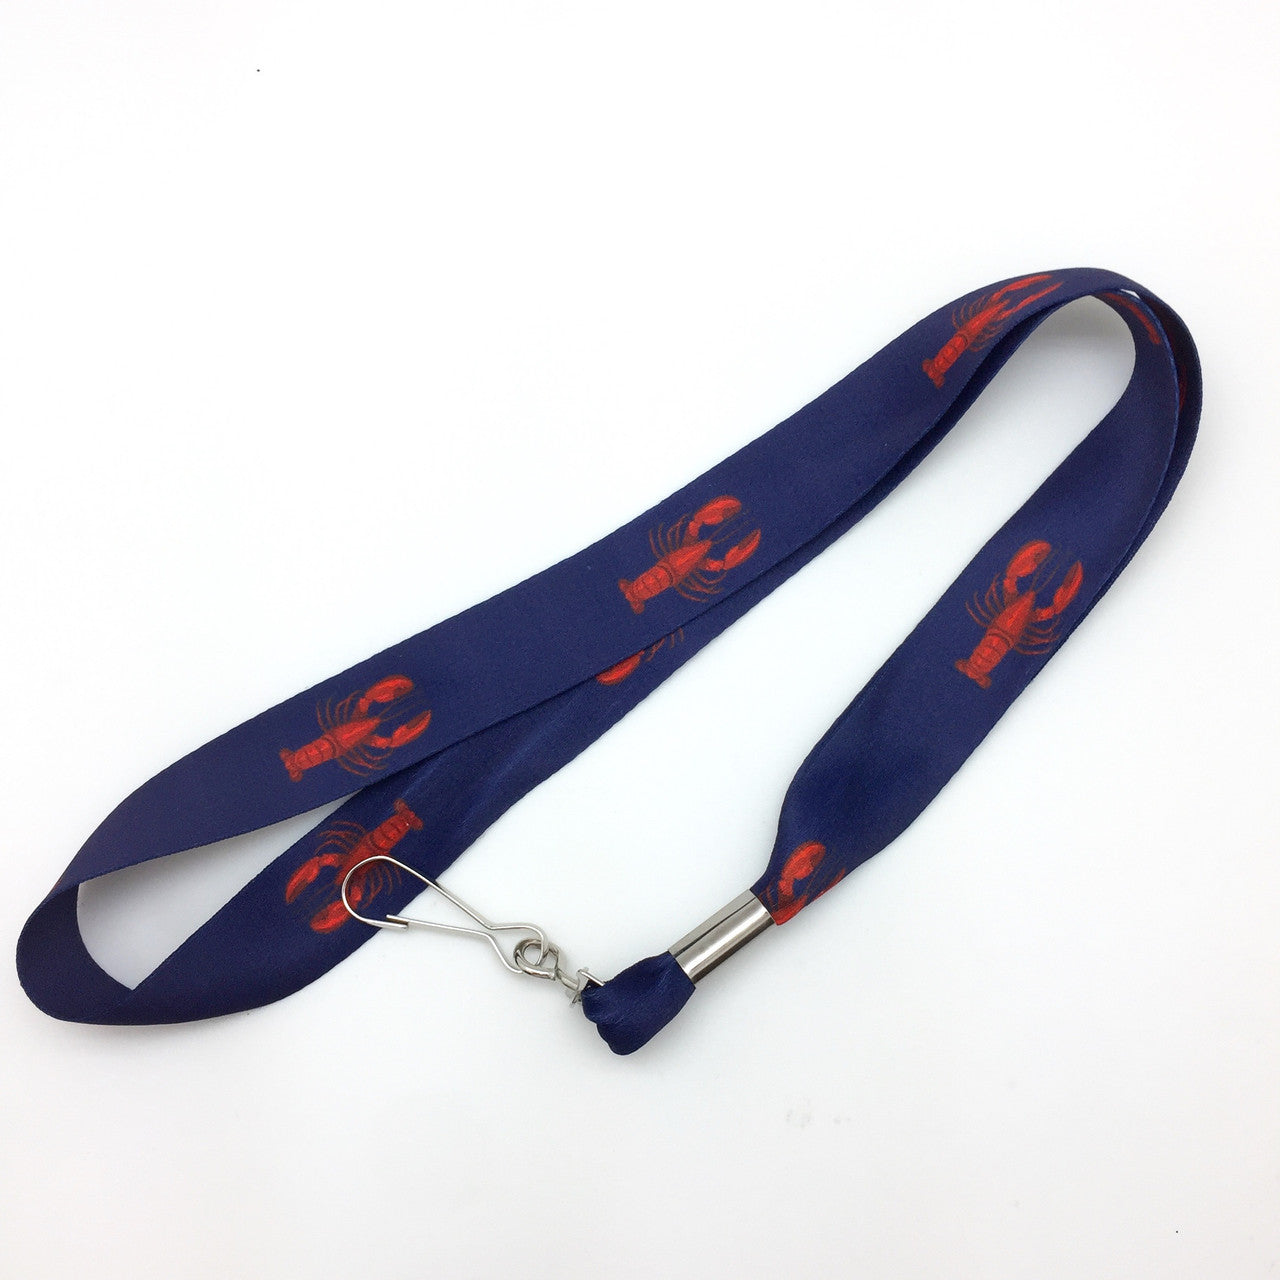 Bright red lobsters on a 1" x 17" lanyard are ready to hold your keys or work ID's! Designed, printed and assembled in the USA